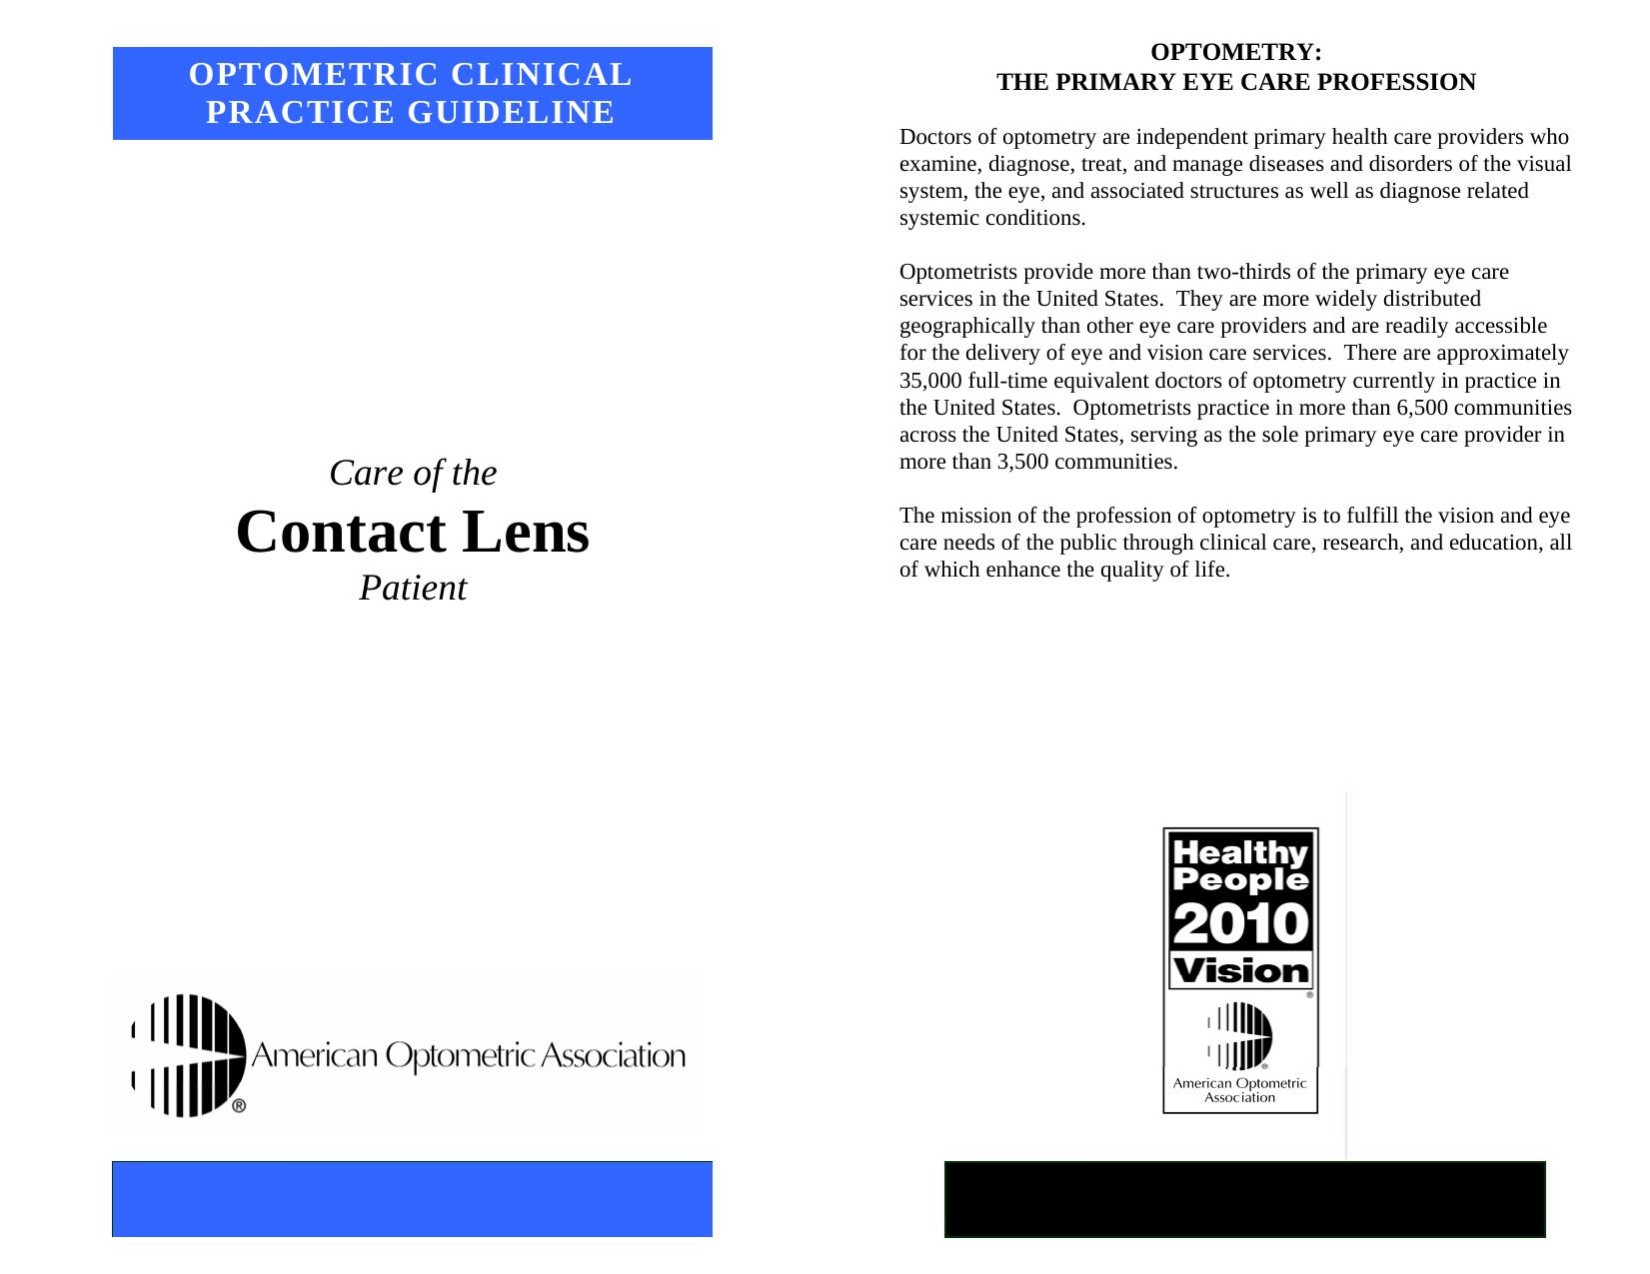 Care of the Contact Lens Patient -- Optometric Clinical Practice Guideline 19